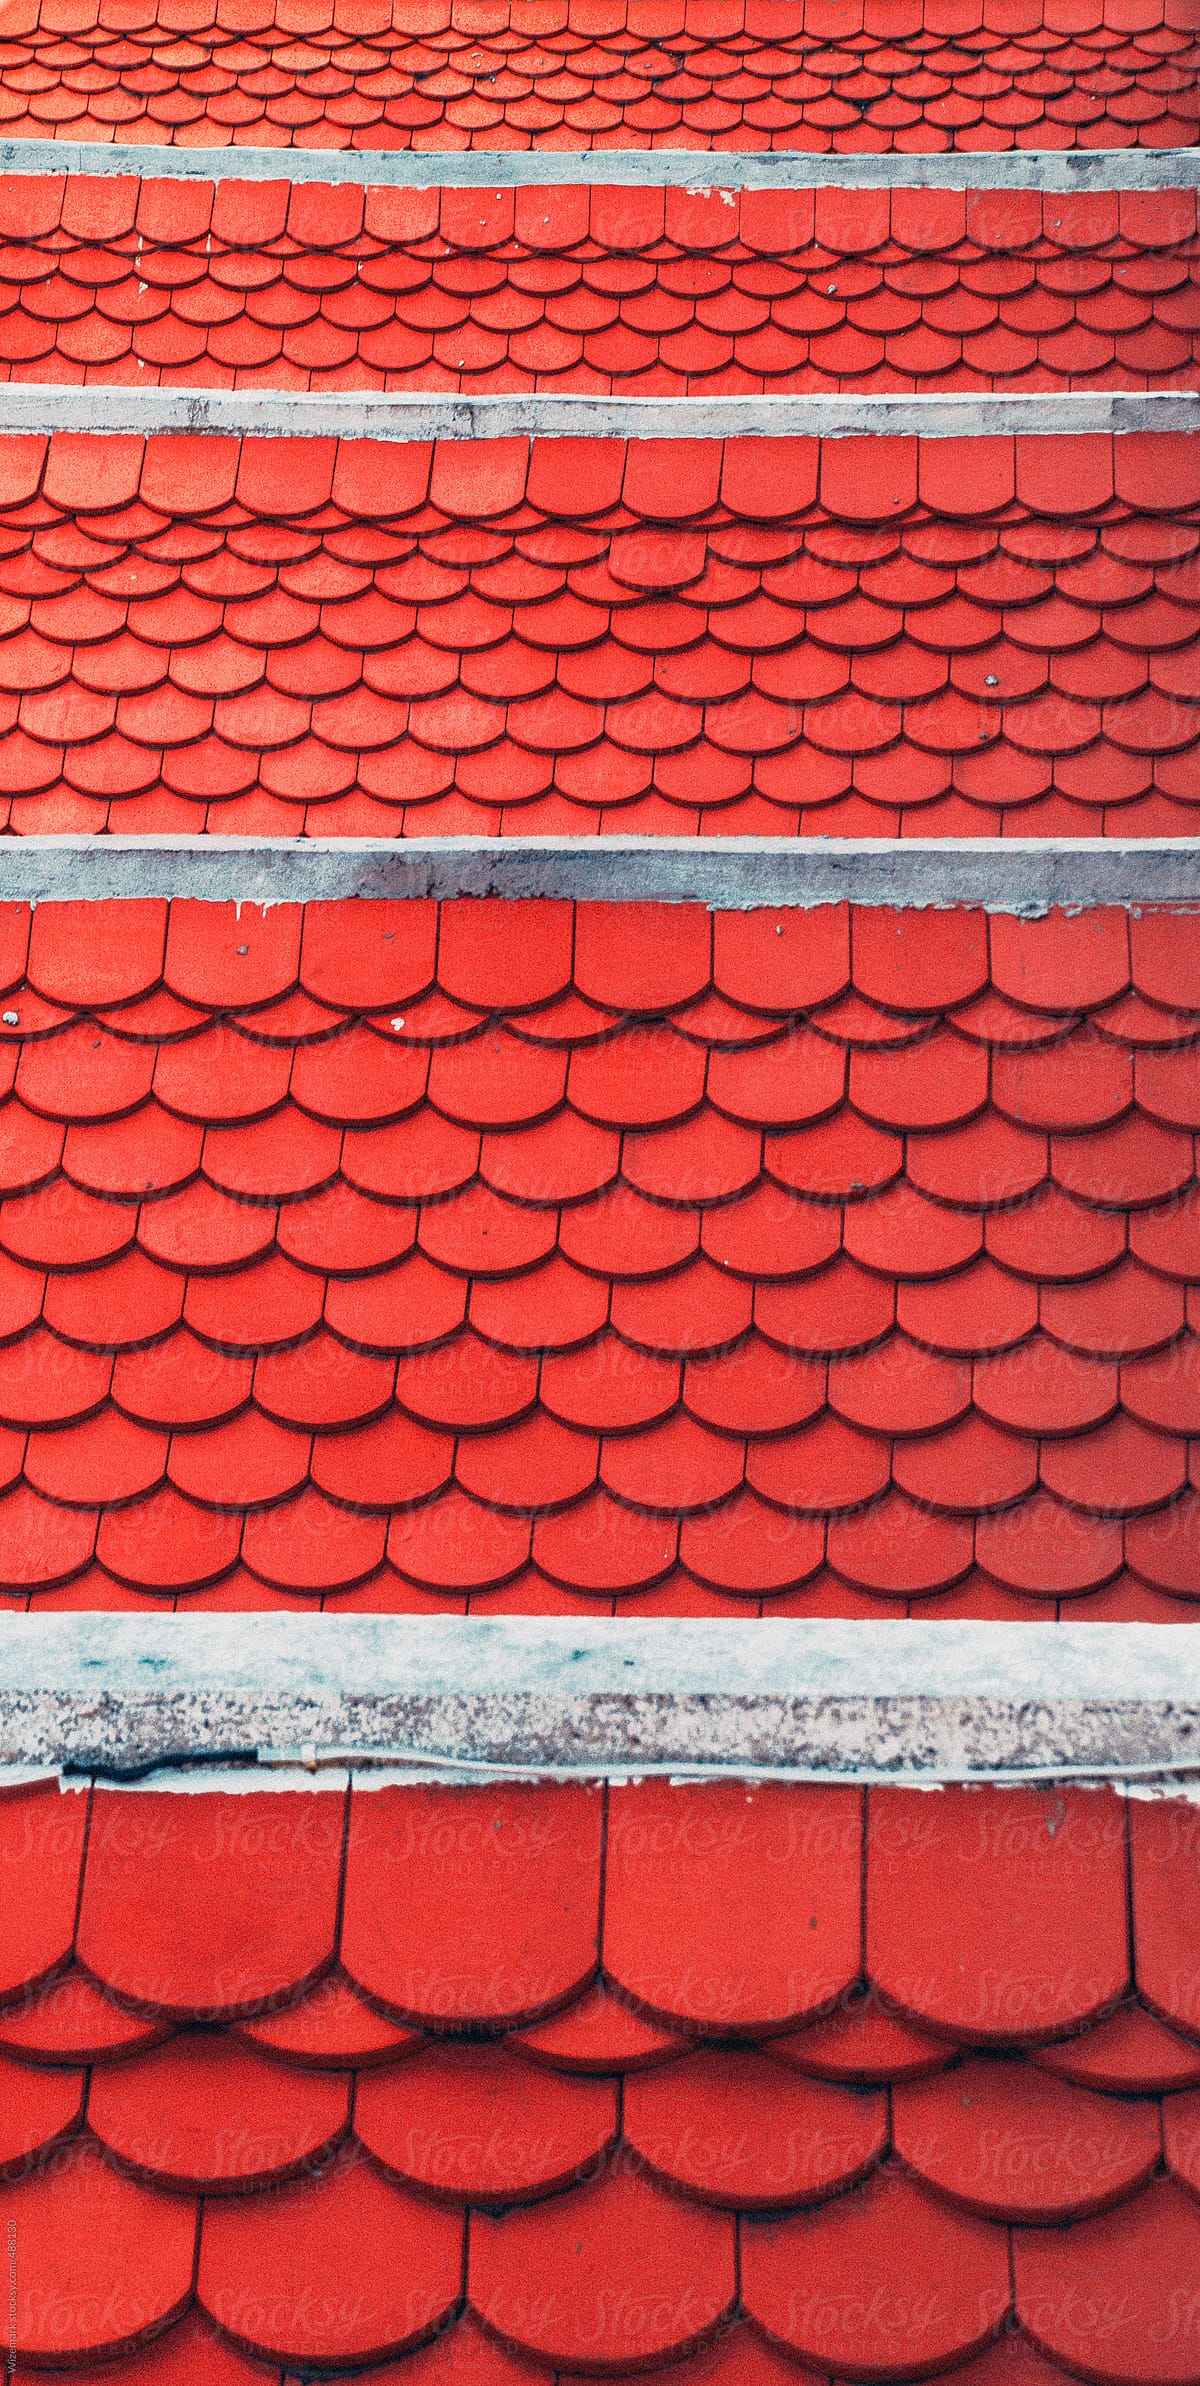 Bright red roof tiles pattern, background